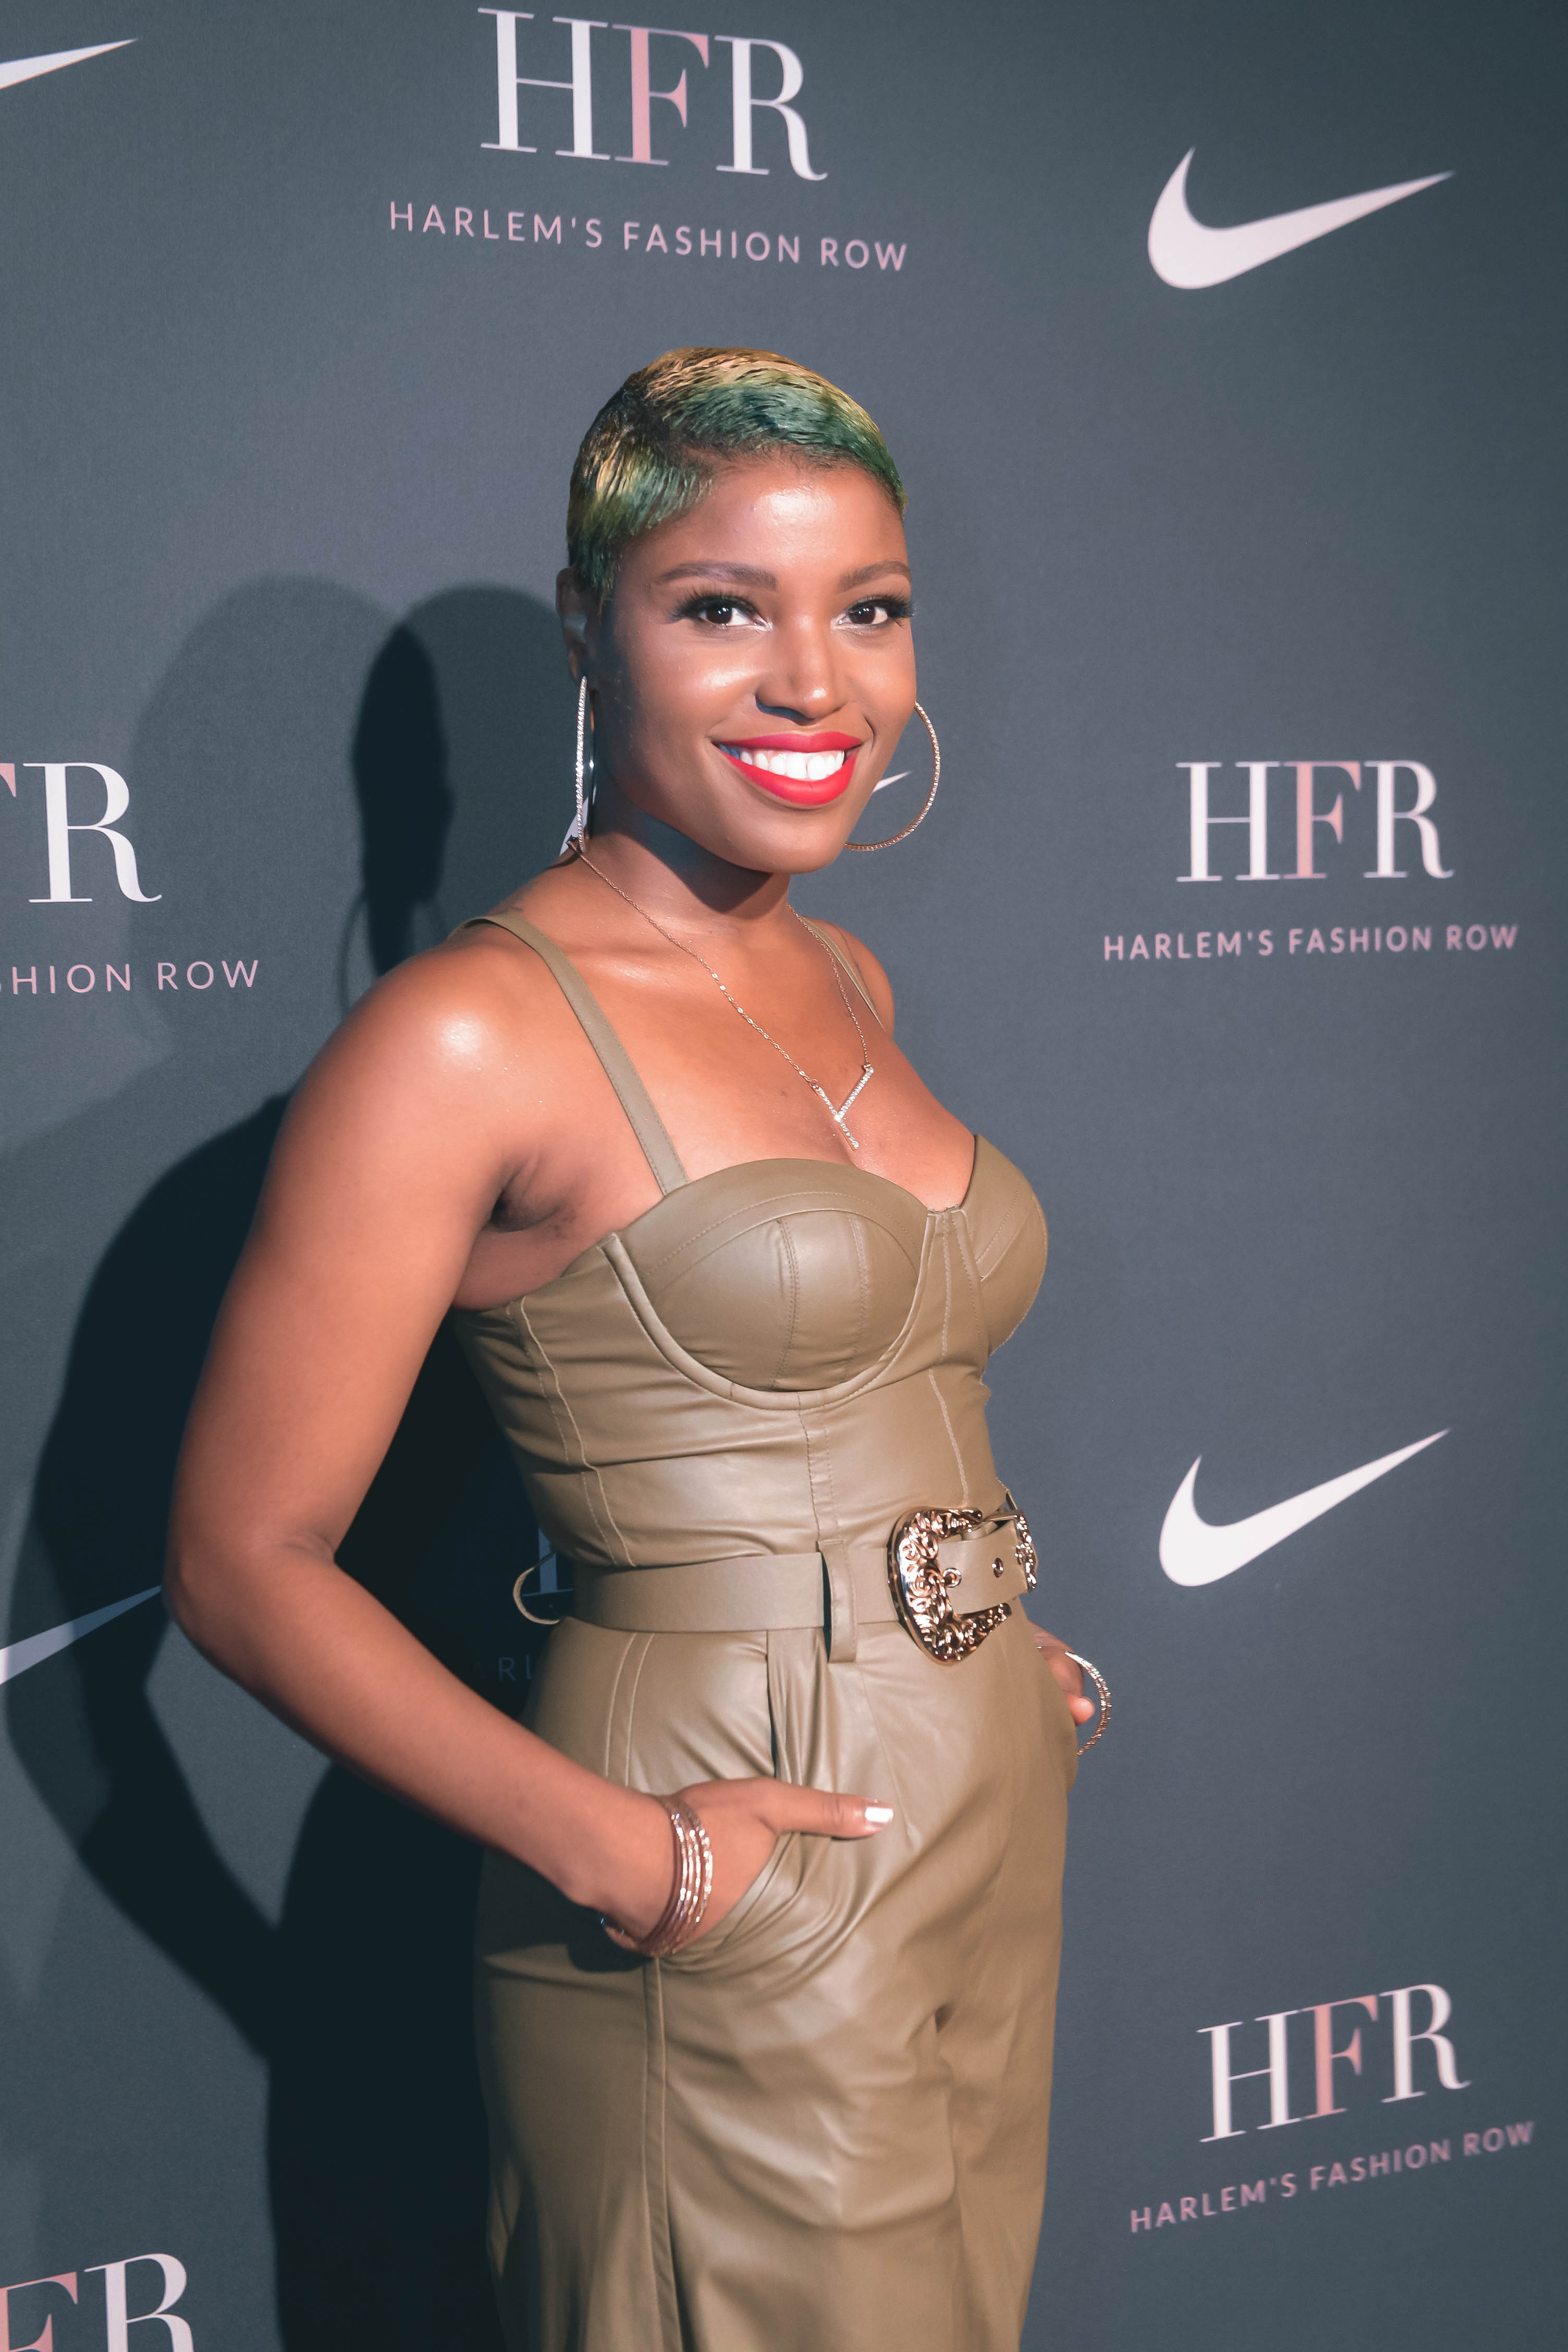 The Stars Align For Harlem’s Fashion Row Annual Dinner And Awards Ceremony